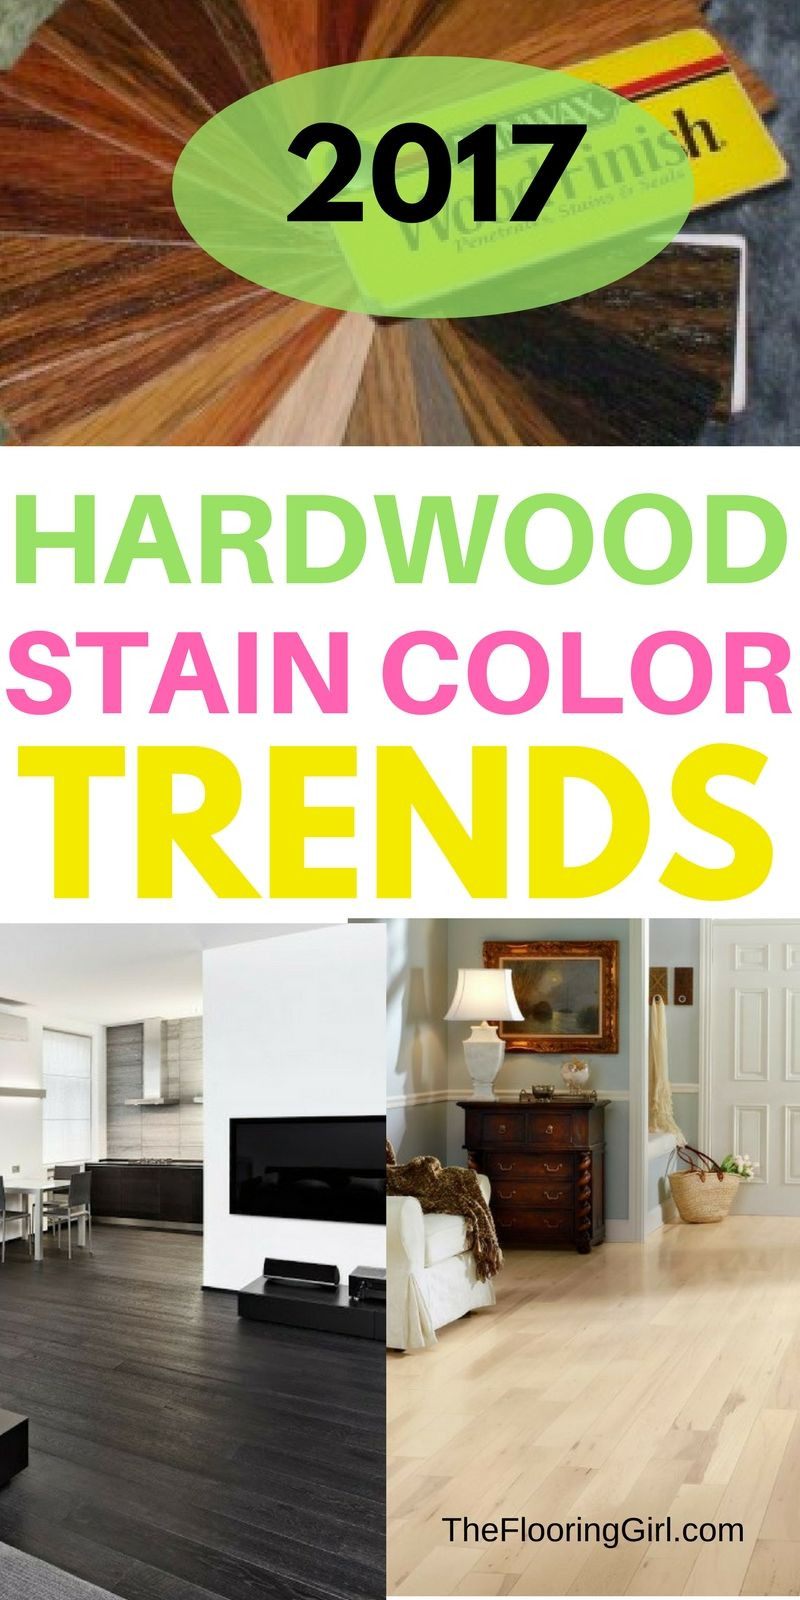 23 attractive Dark Hardwood Floors Cost 2024 free download dark hardwood floors cost of hardwood flooring stain color trends 2018 more from the flooring with regard to hardwood flooring stain color trends for 2017 hardwood colors that are in style t